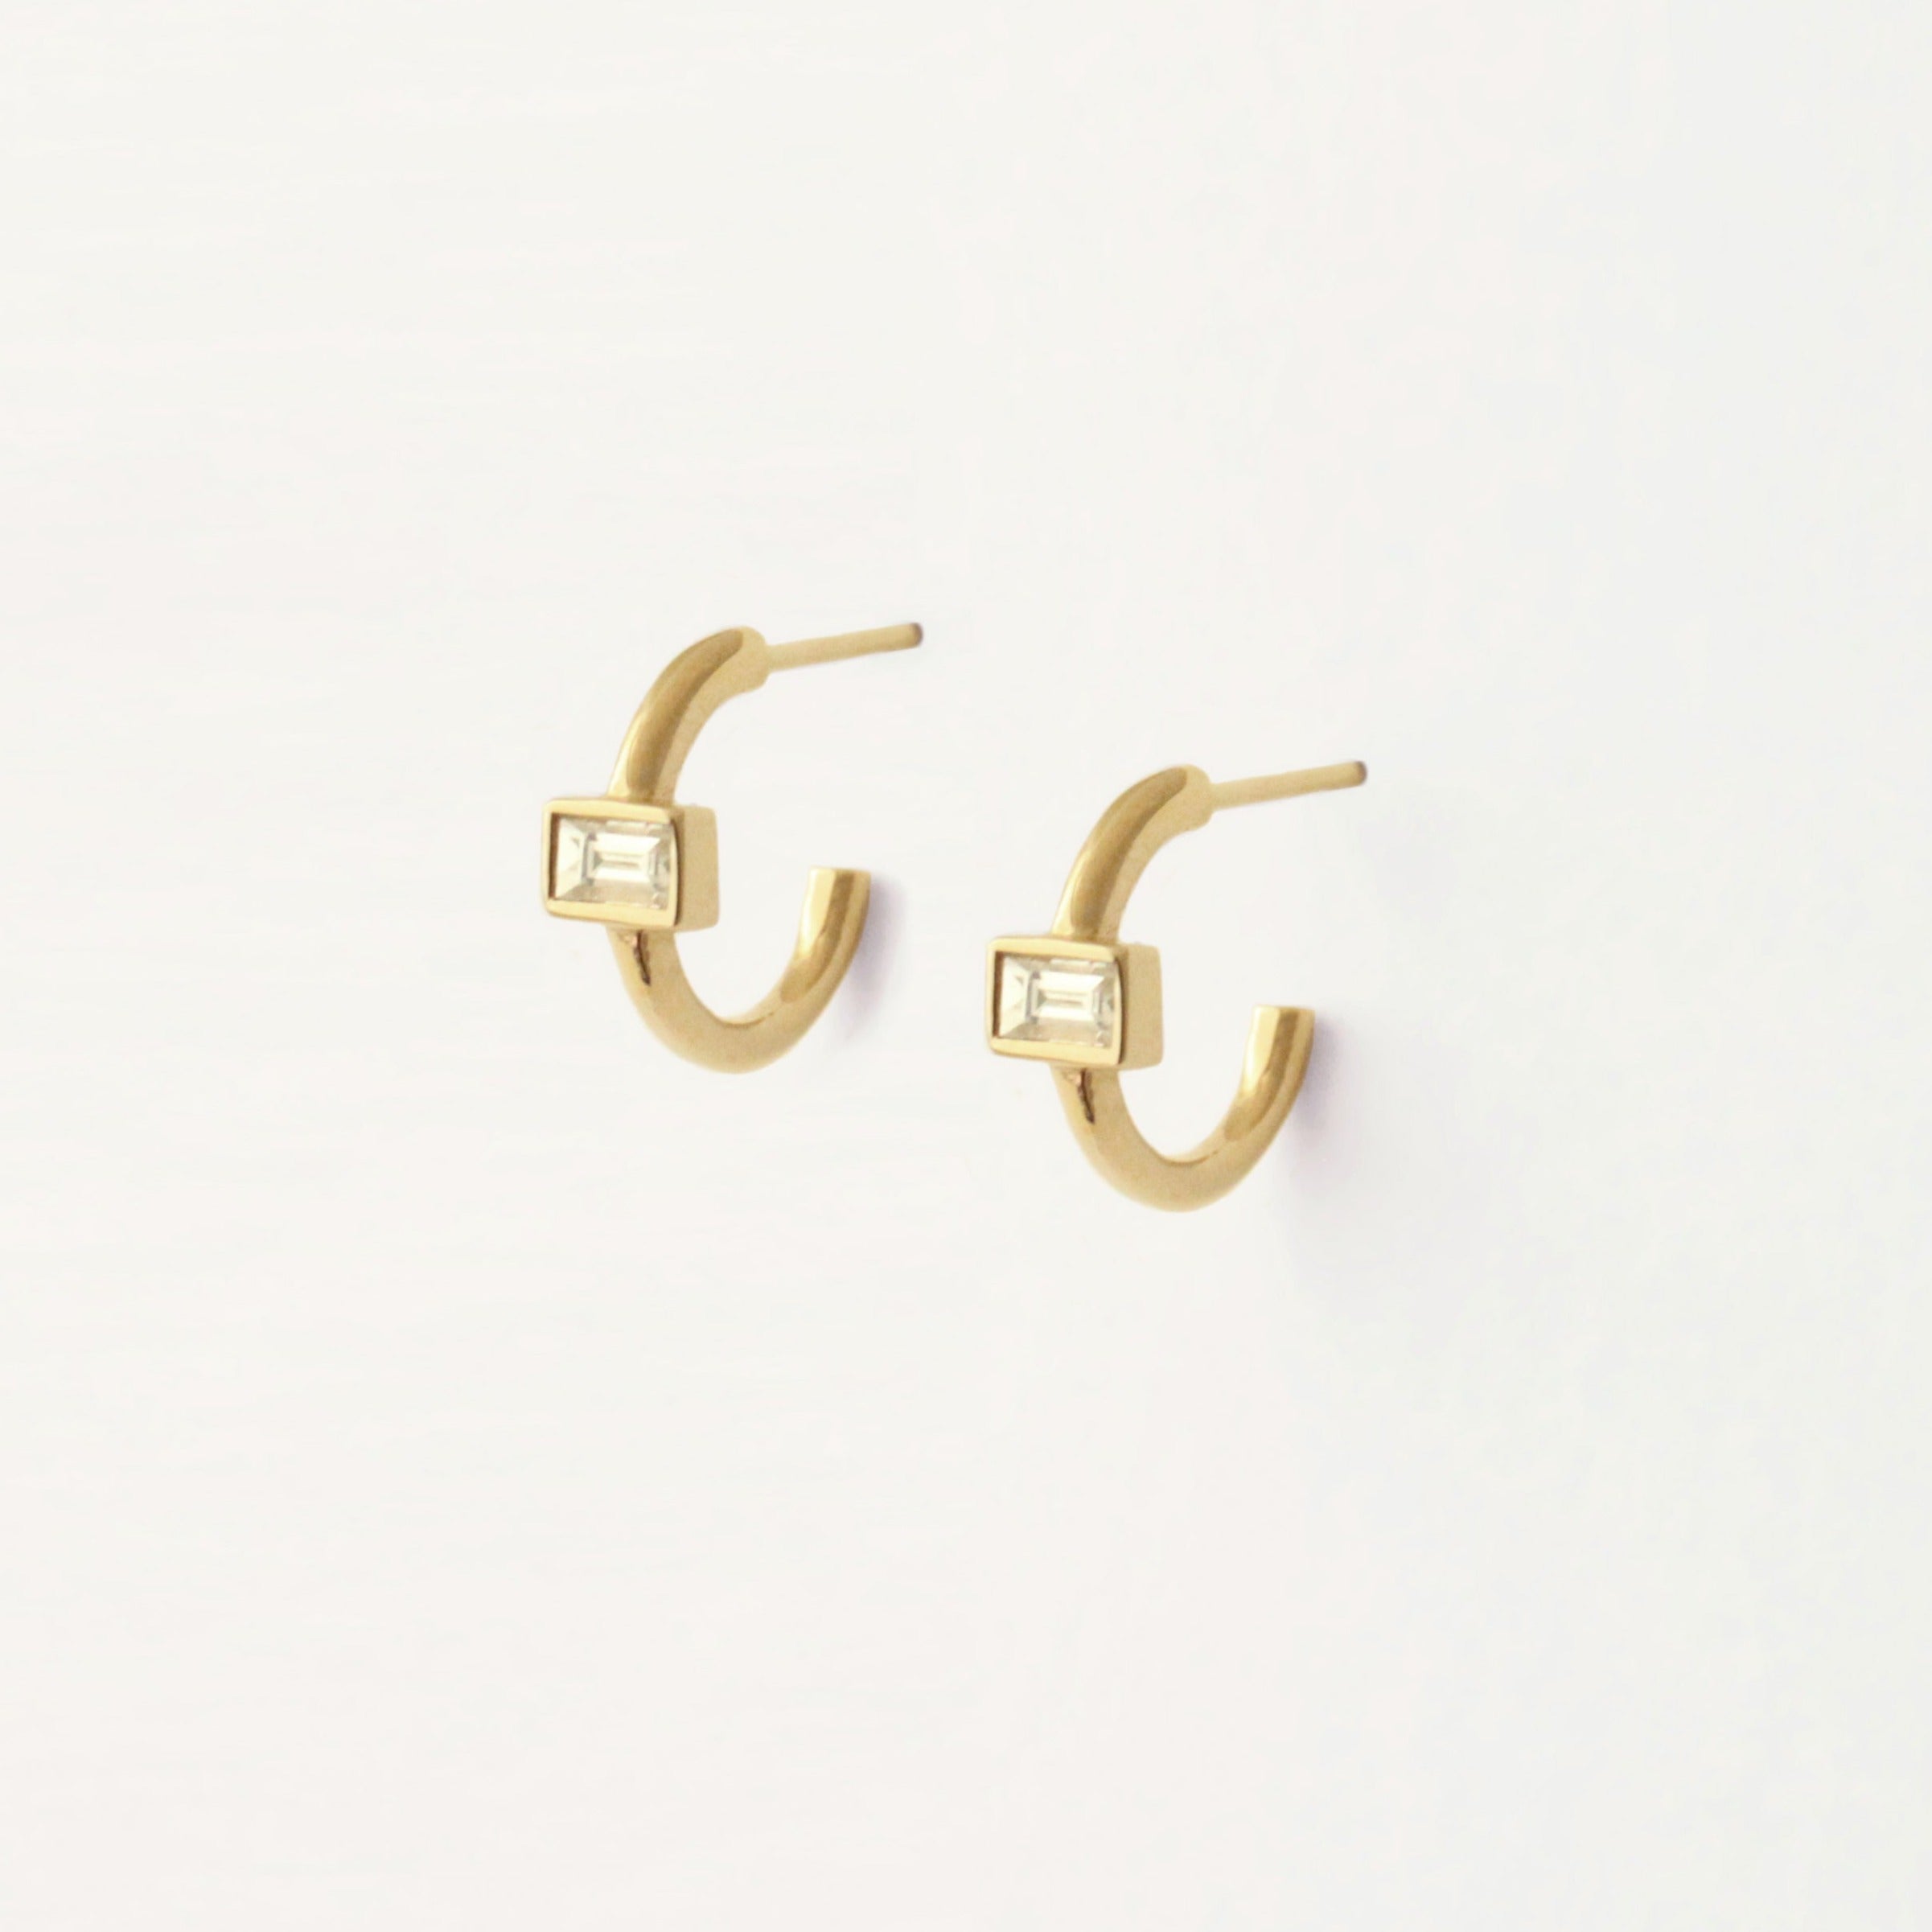 Baguette huggie hoops with baguette centered horizontally on the 14k yelllow gold hoop. It's elegant and simple. An elevated everyday piece of jewelry.